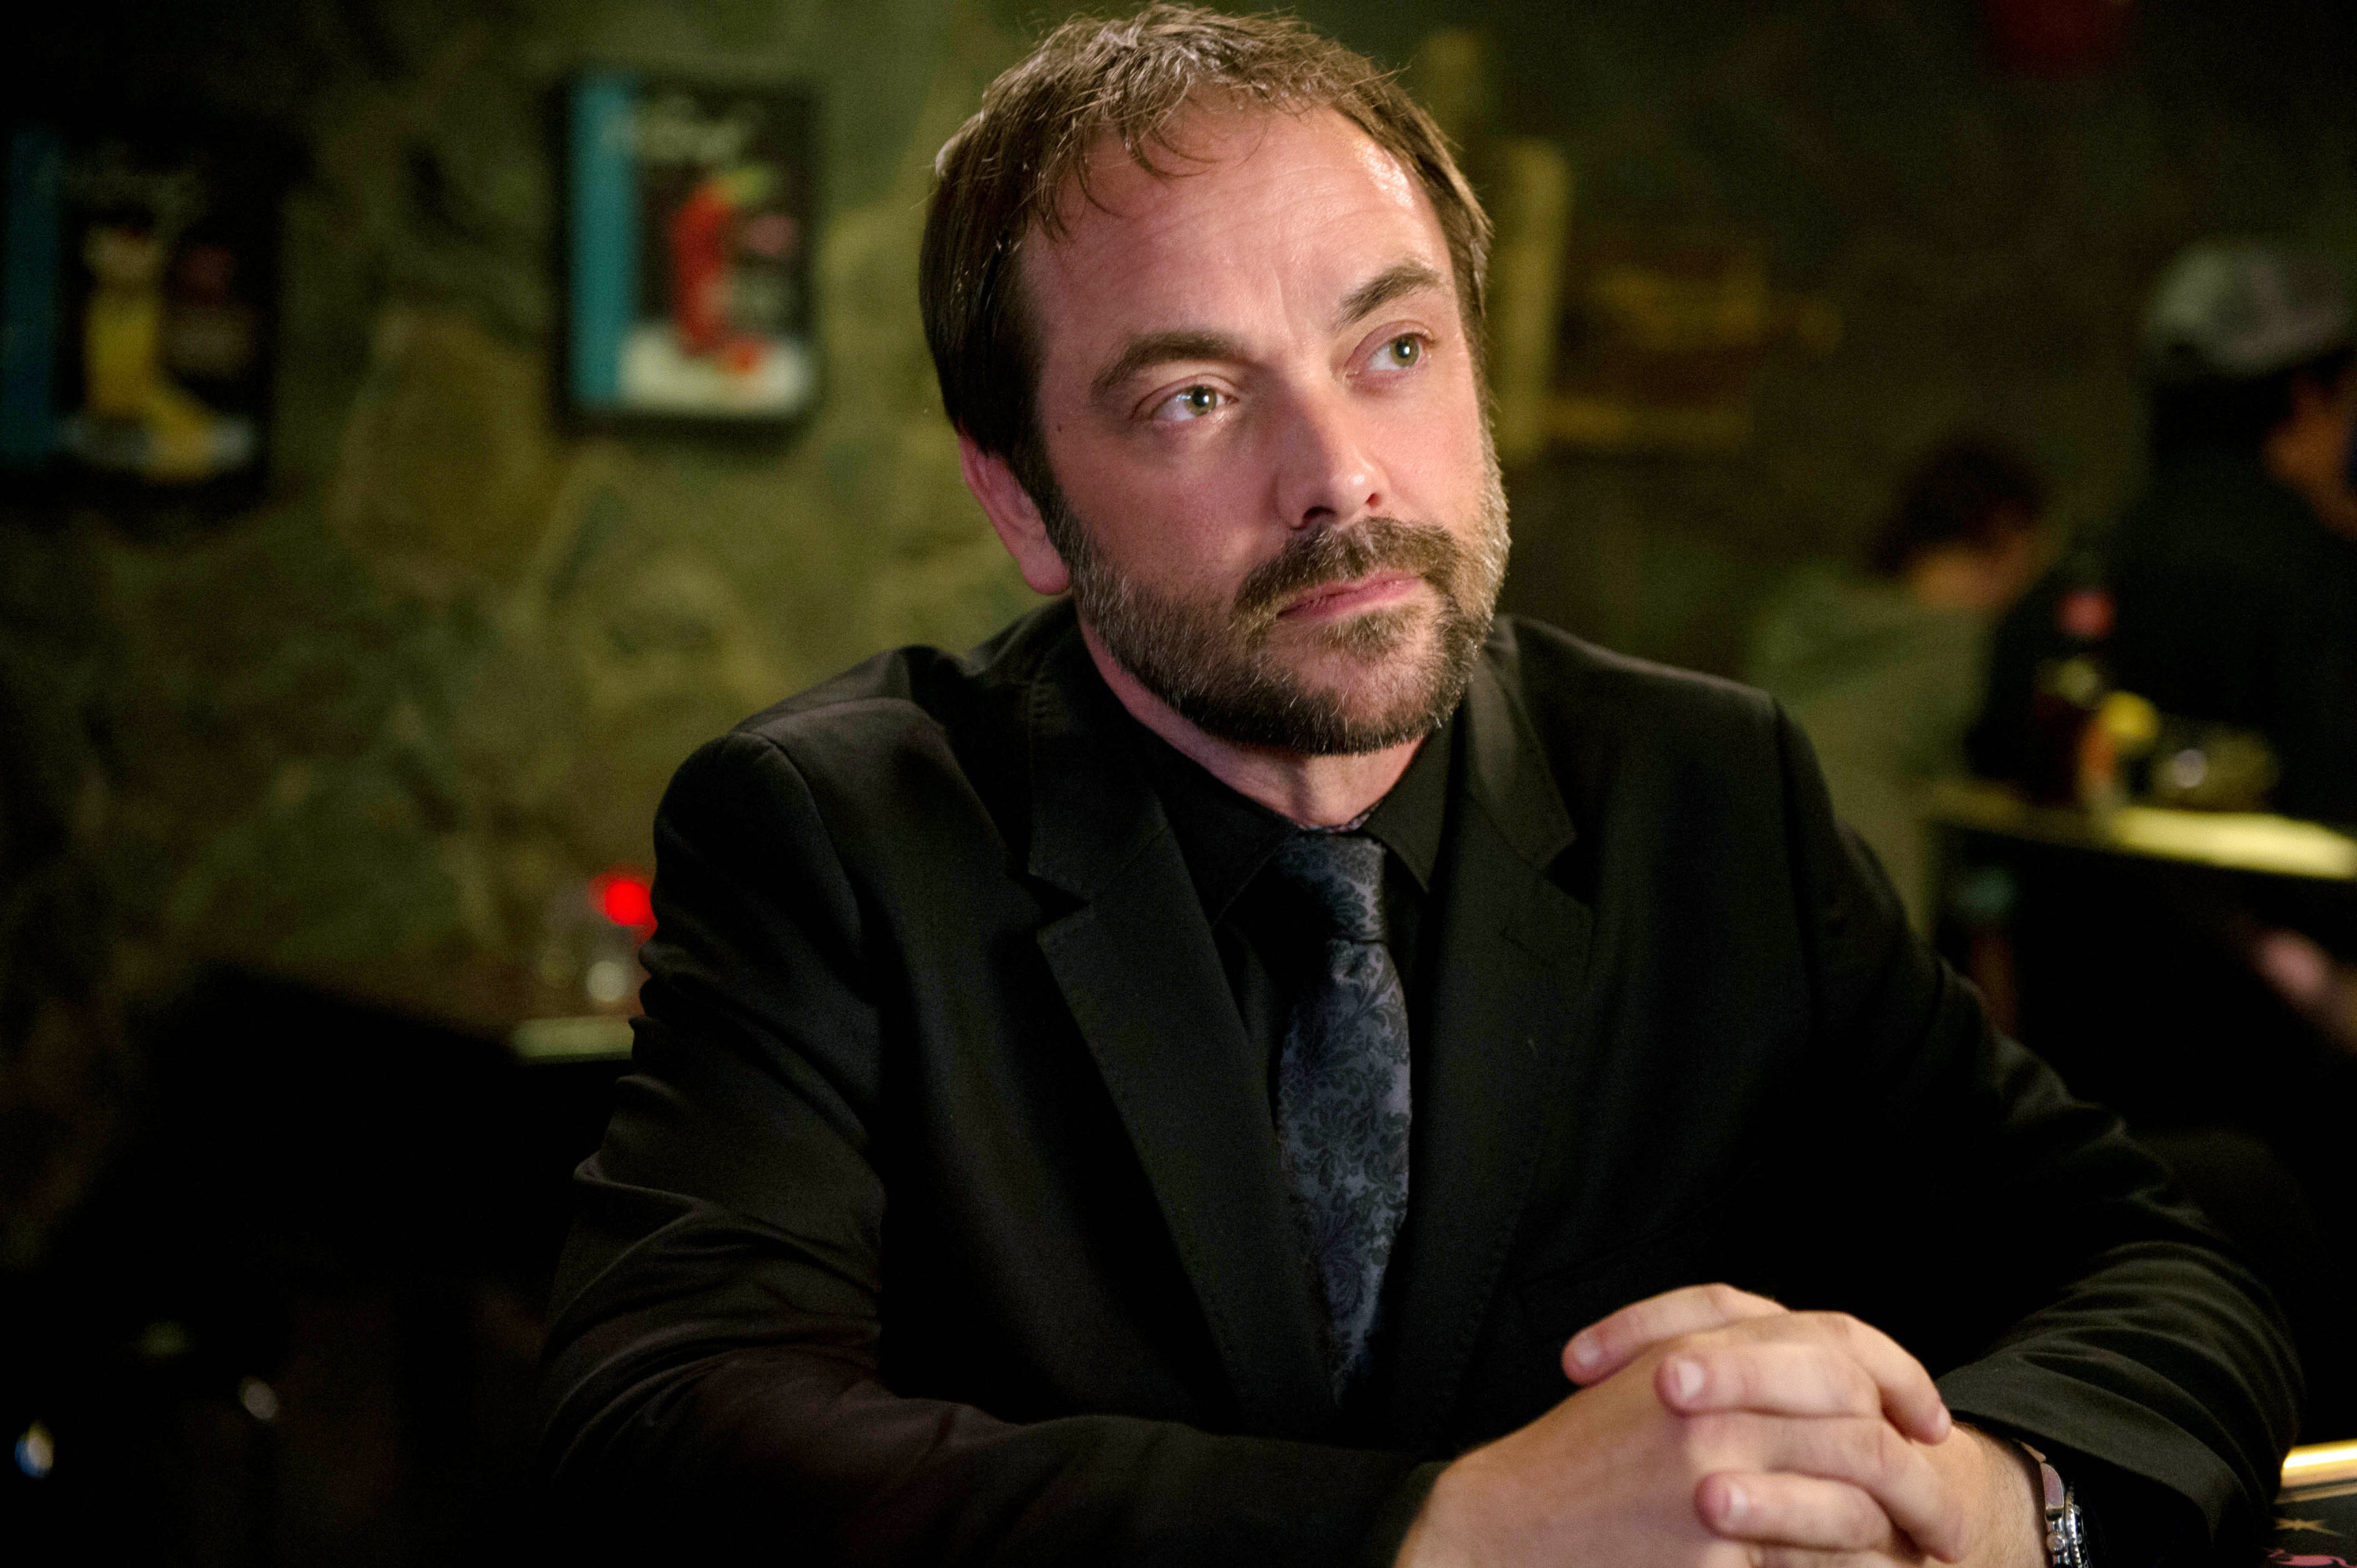 Crowley with his hands clasped